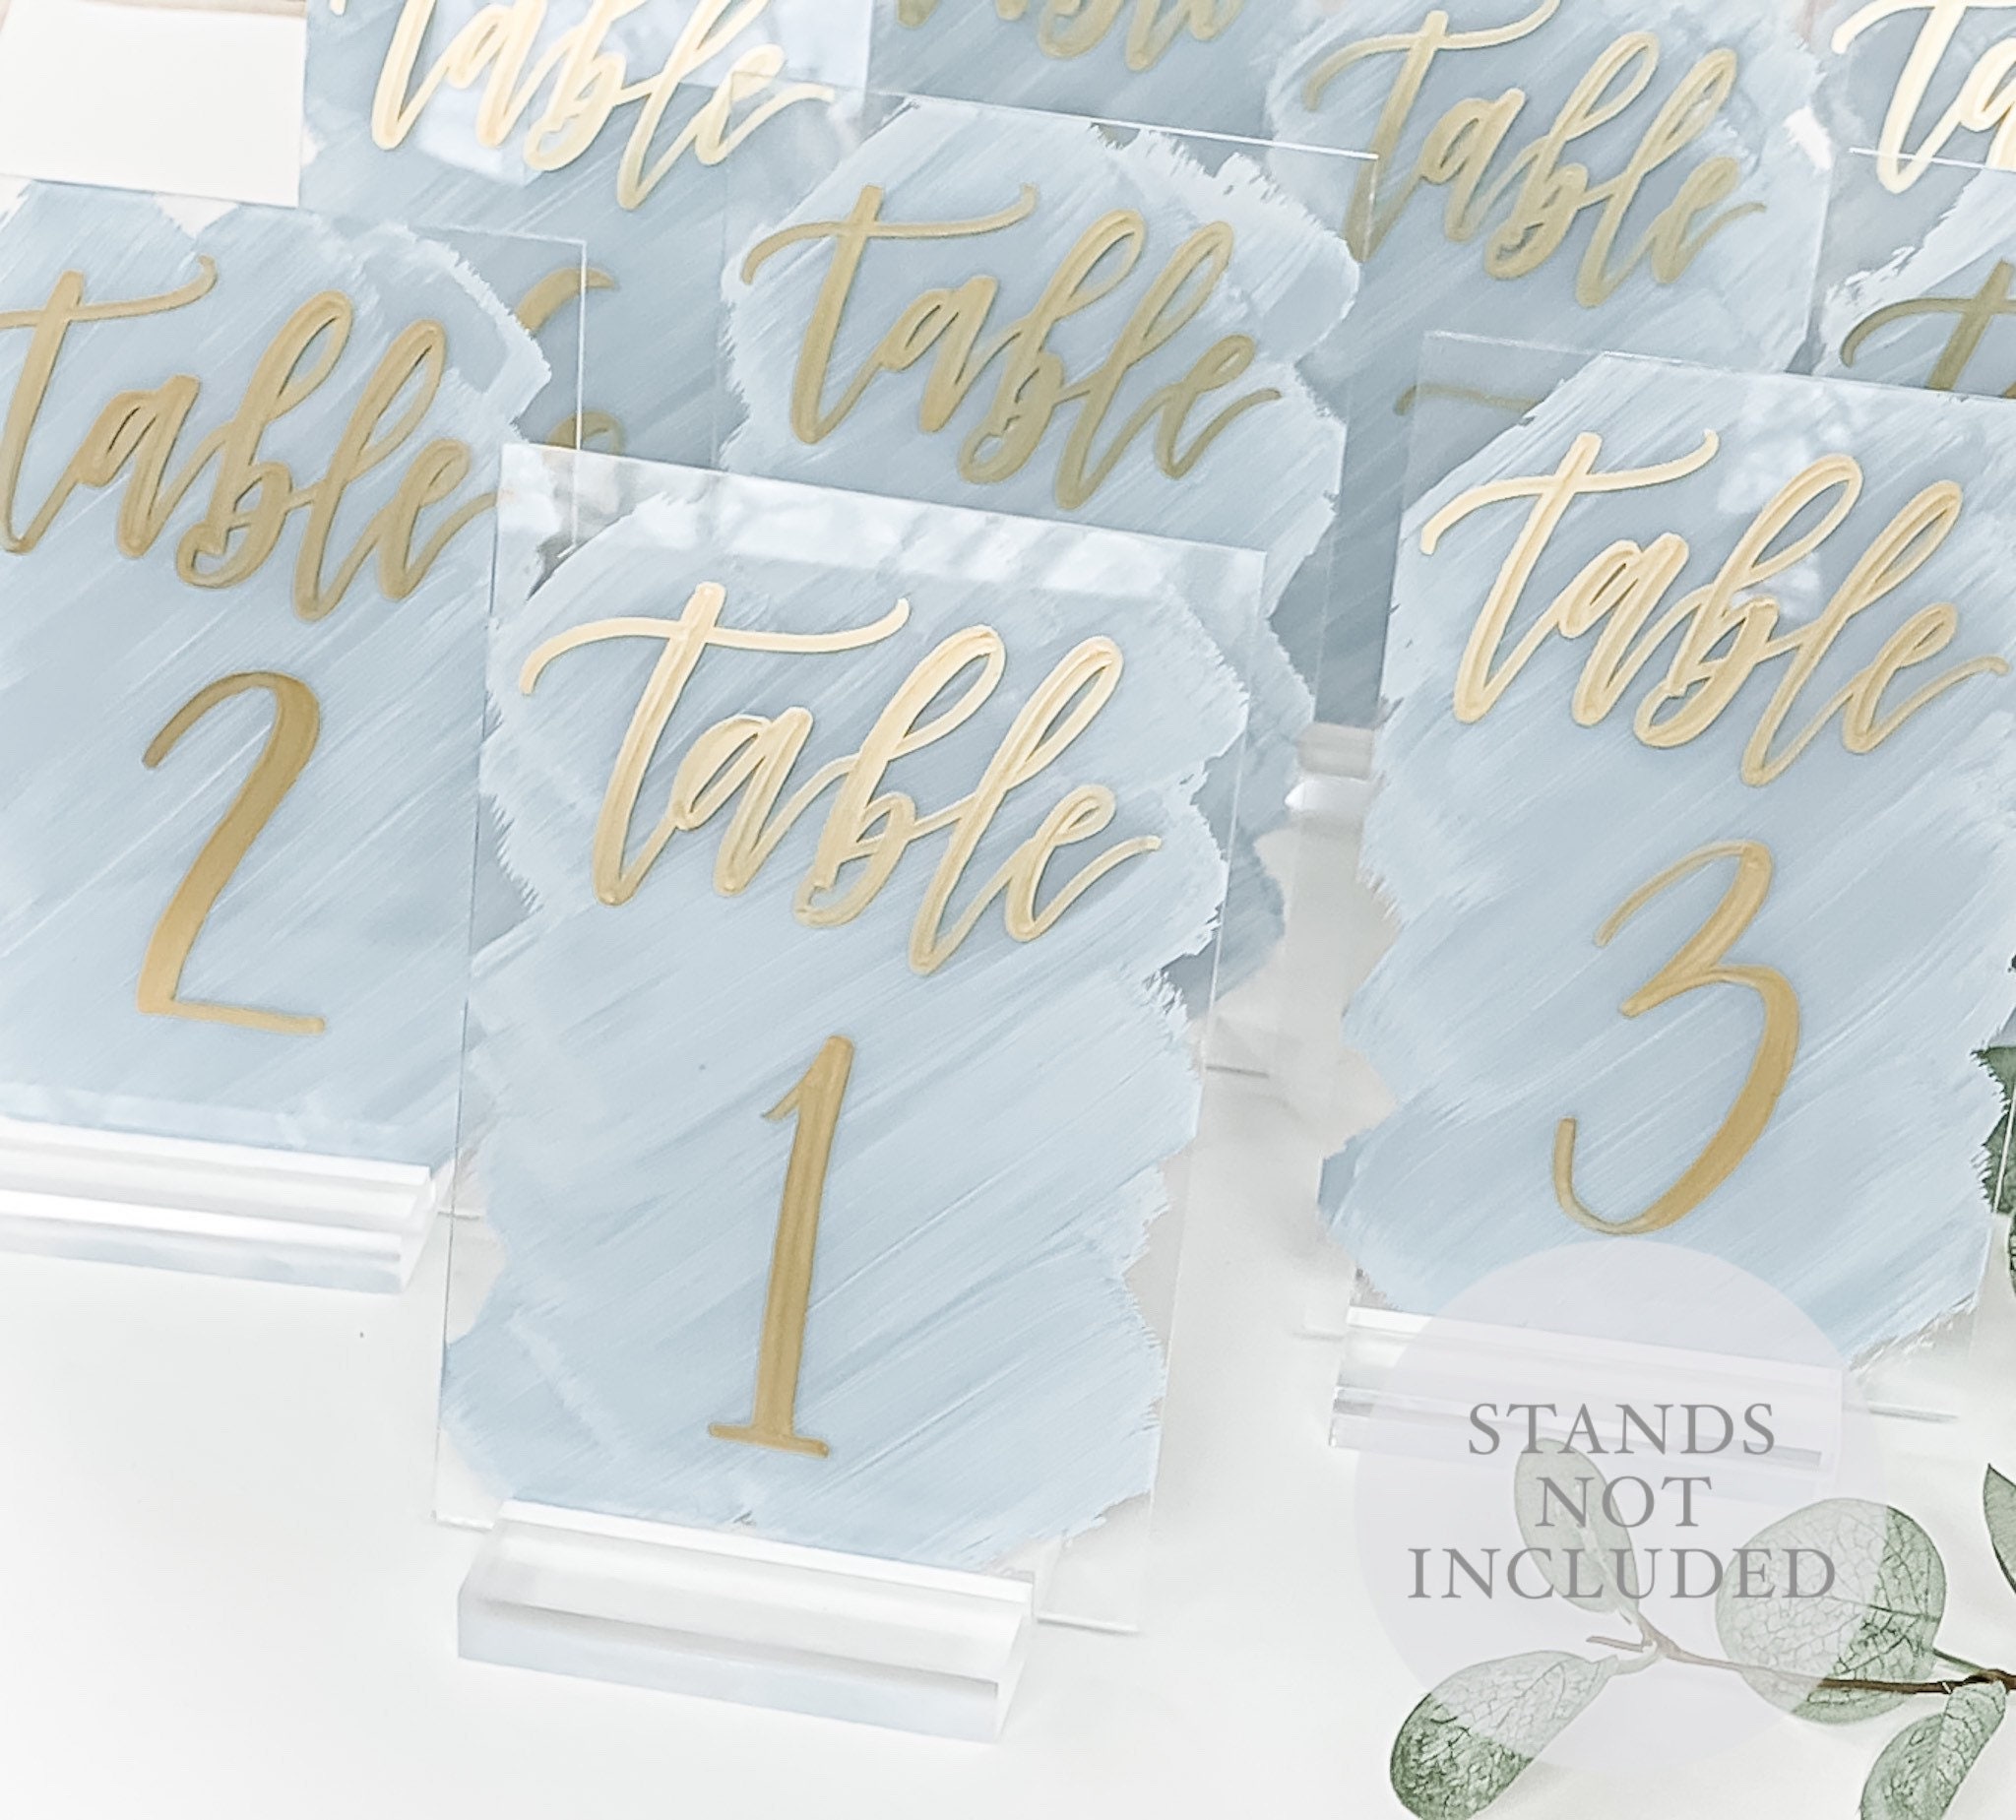 10 Pieces 4x6 inch Blank Acrylic Signs Clear Acrylic Sheets, Perfect for Making Wedding Table Numbers, Acrylic Wedding Signs, Engrave, Calligraphy